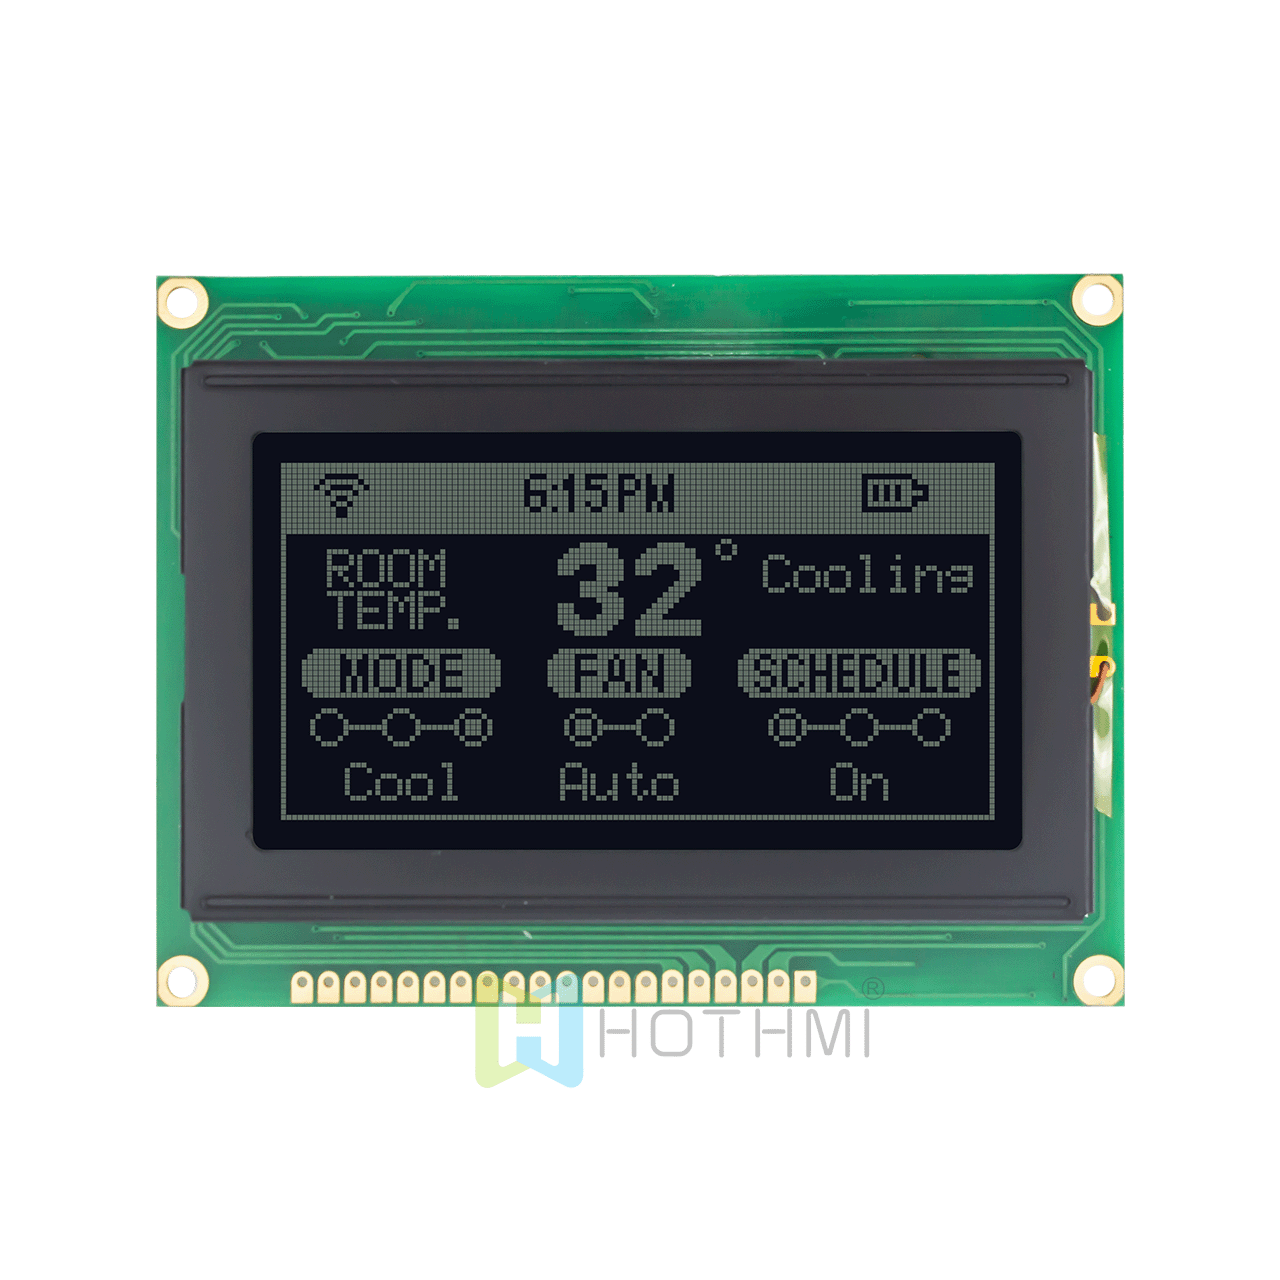 3.2-inch grayscale graphic display/128x64 graphic LCD module/DSTN negative display white backlight/KS0108+KS0107 or compatible/5.0v/translucent polarizer